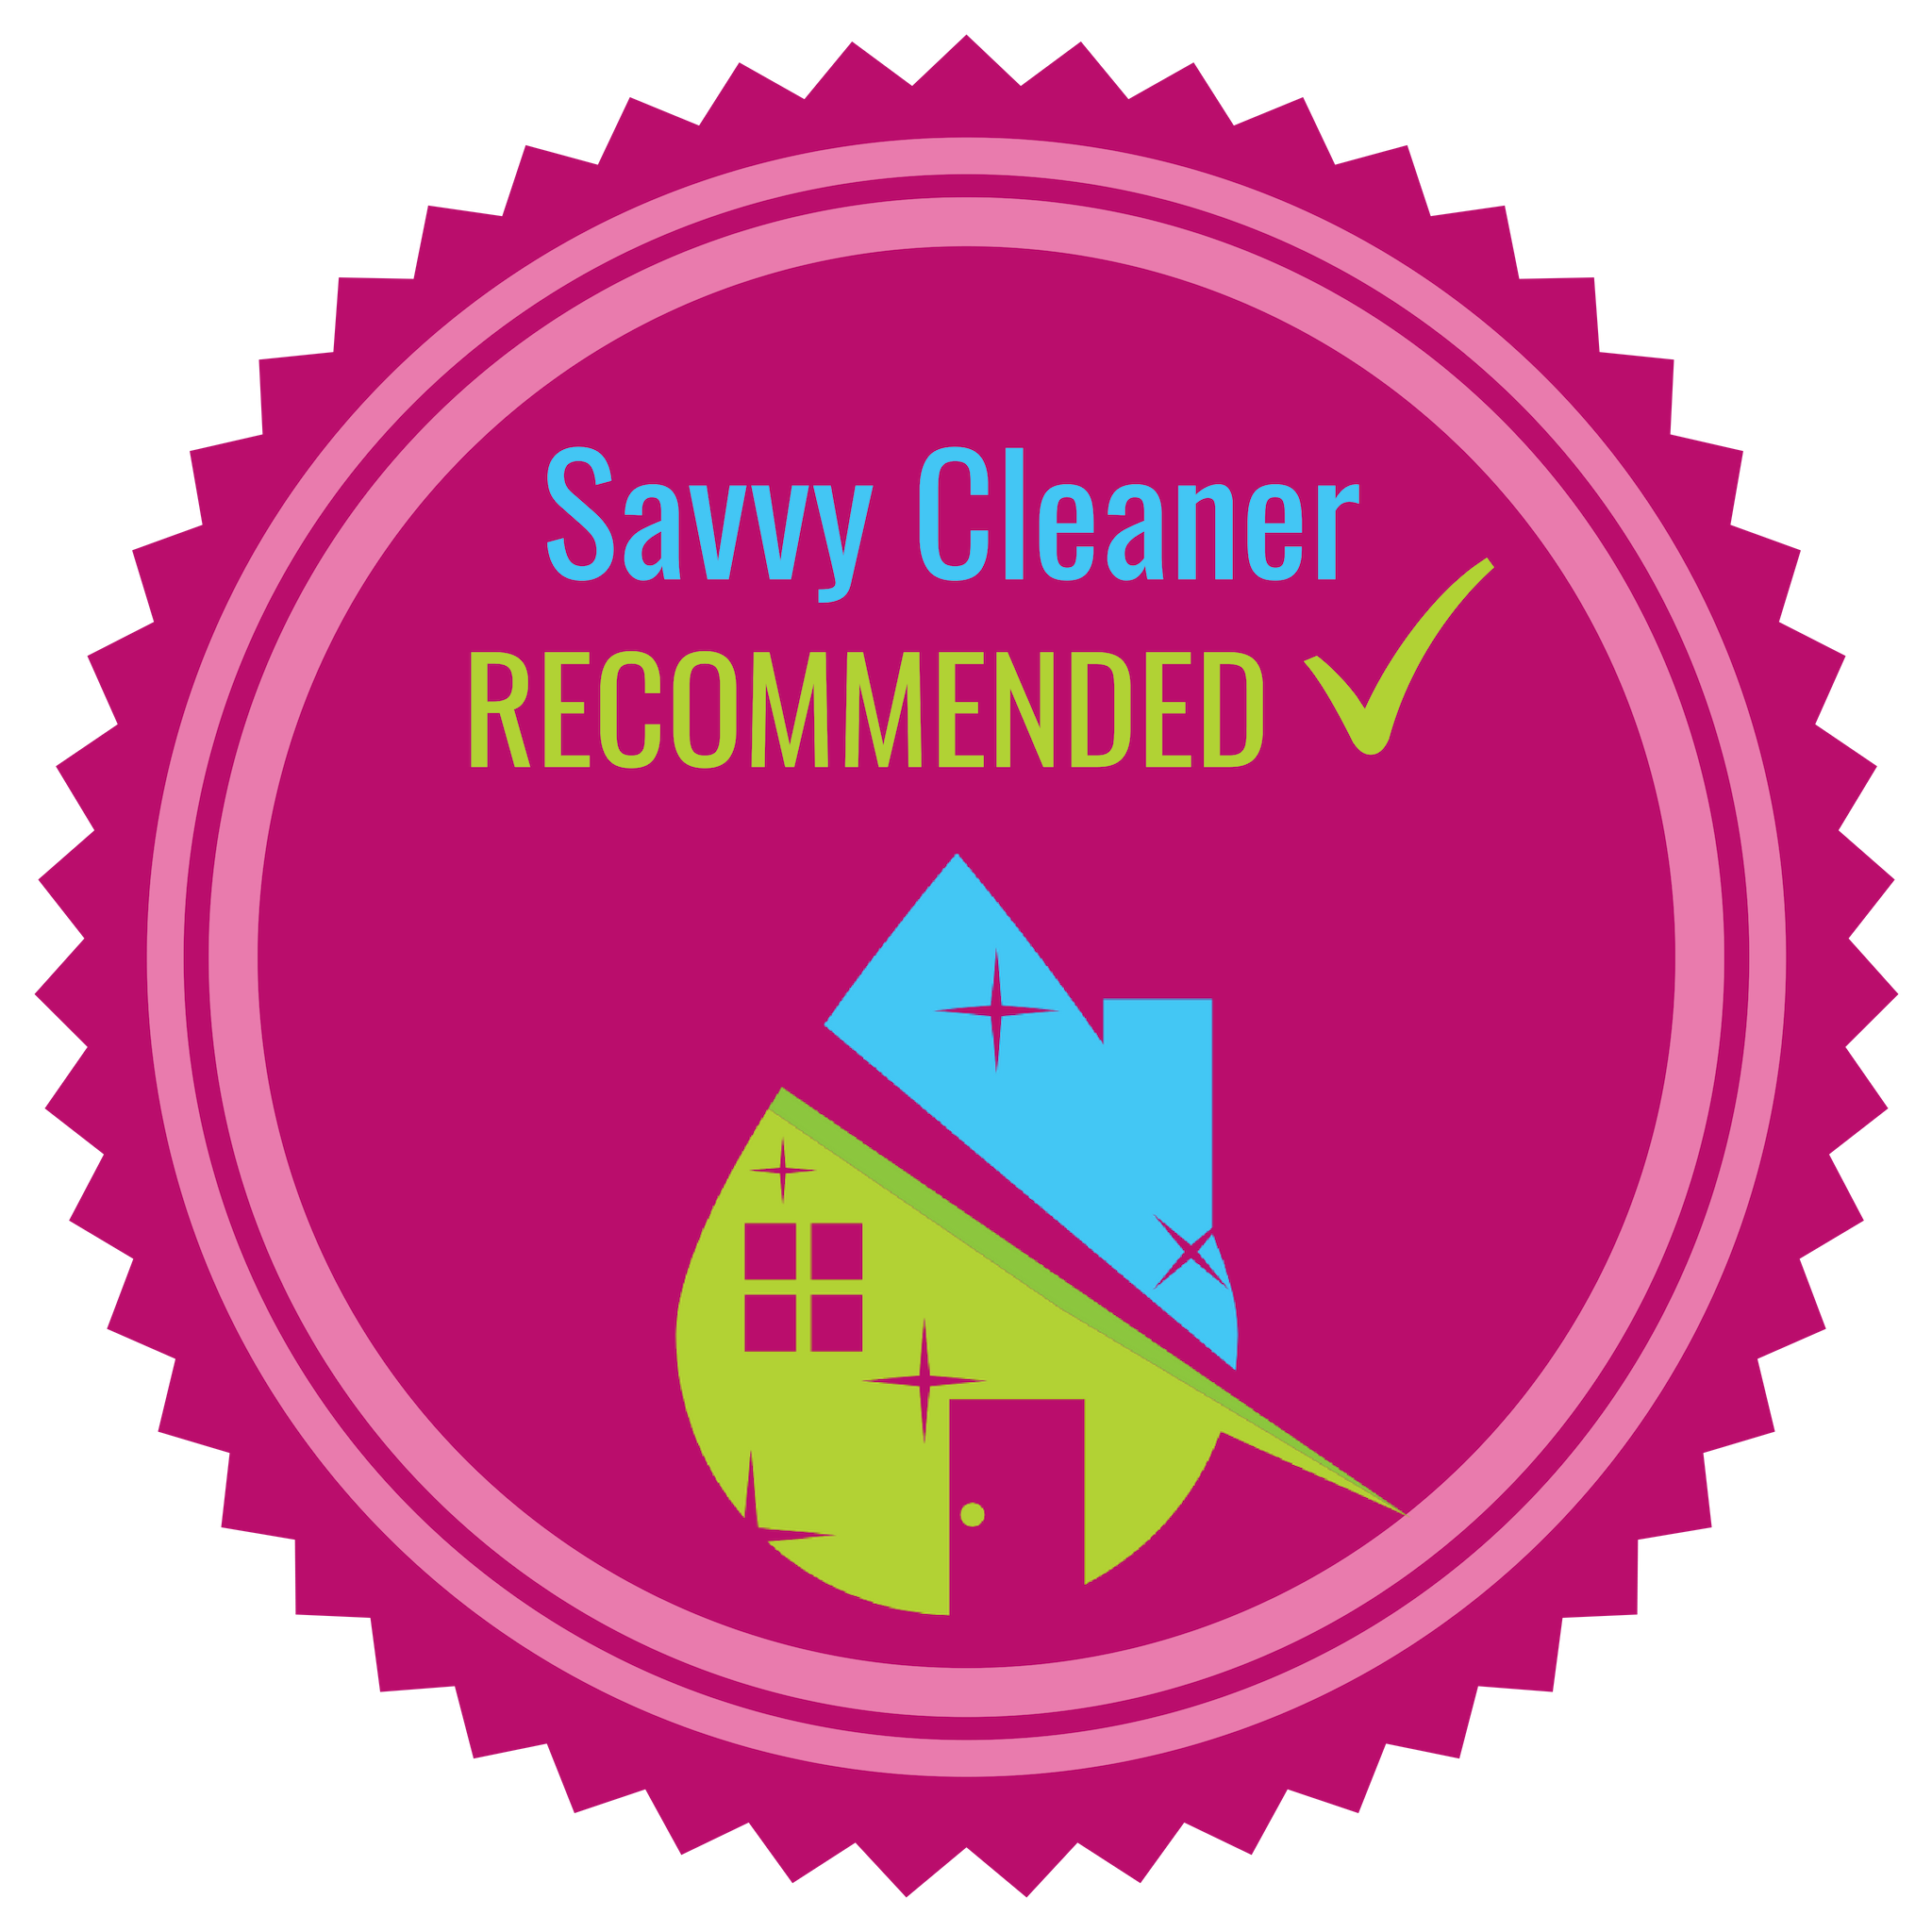 Savvy Cleaner Recommended